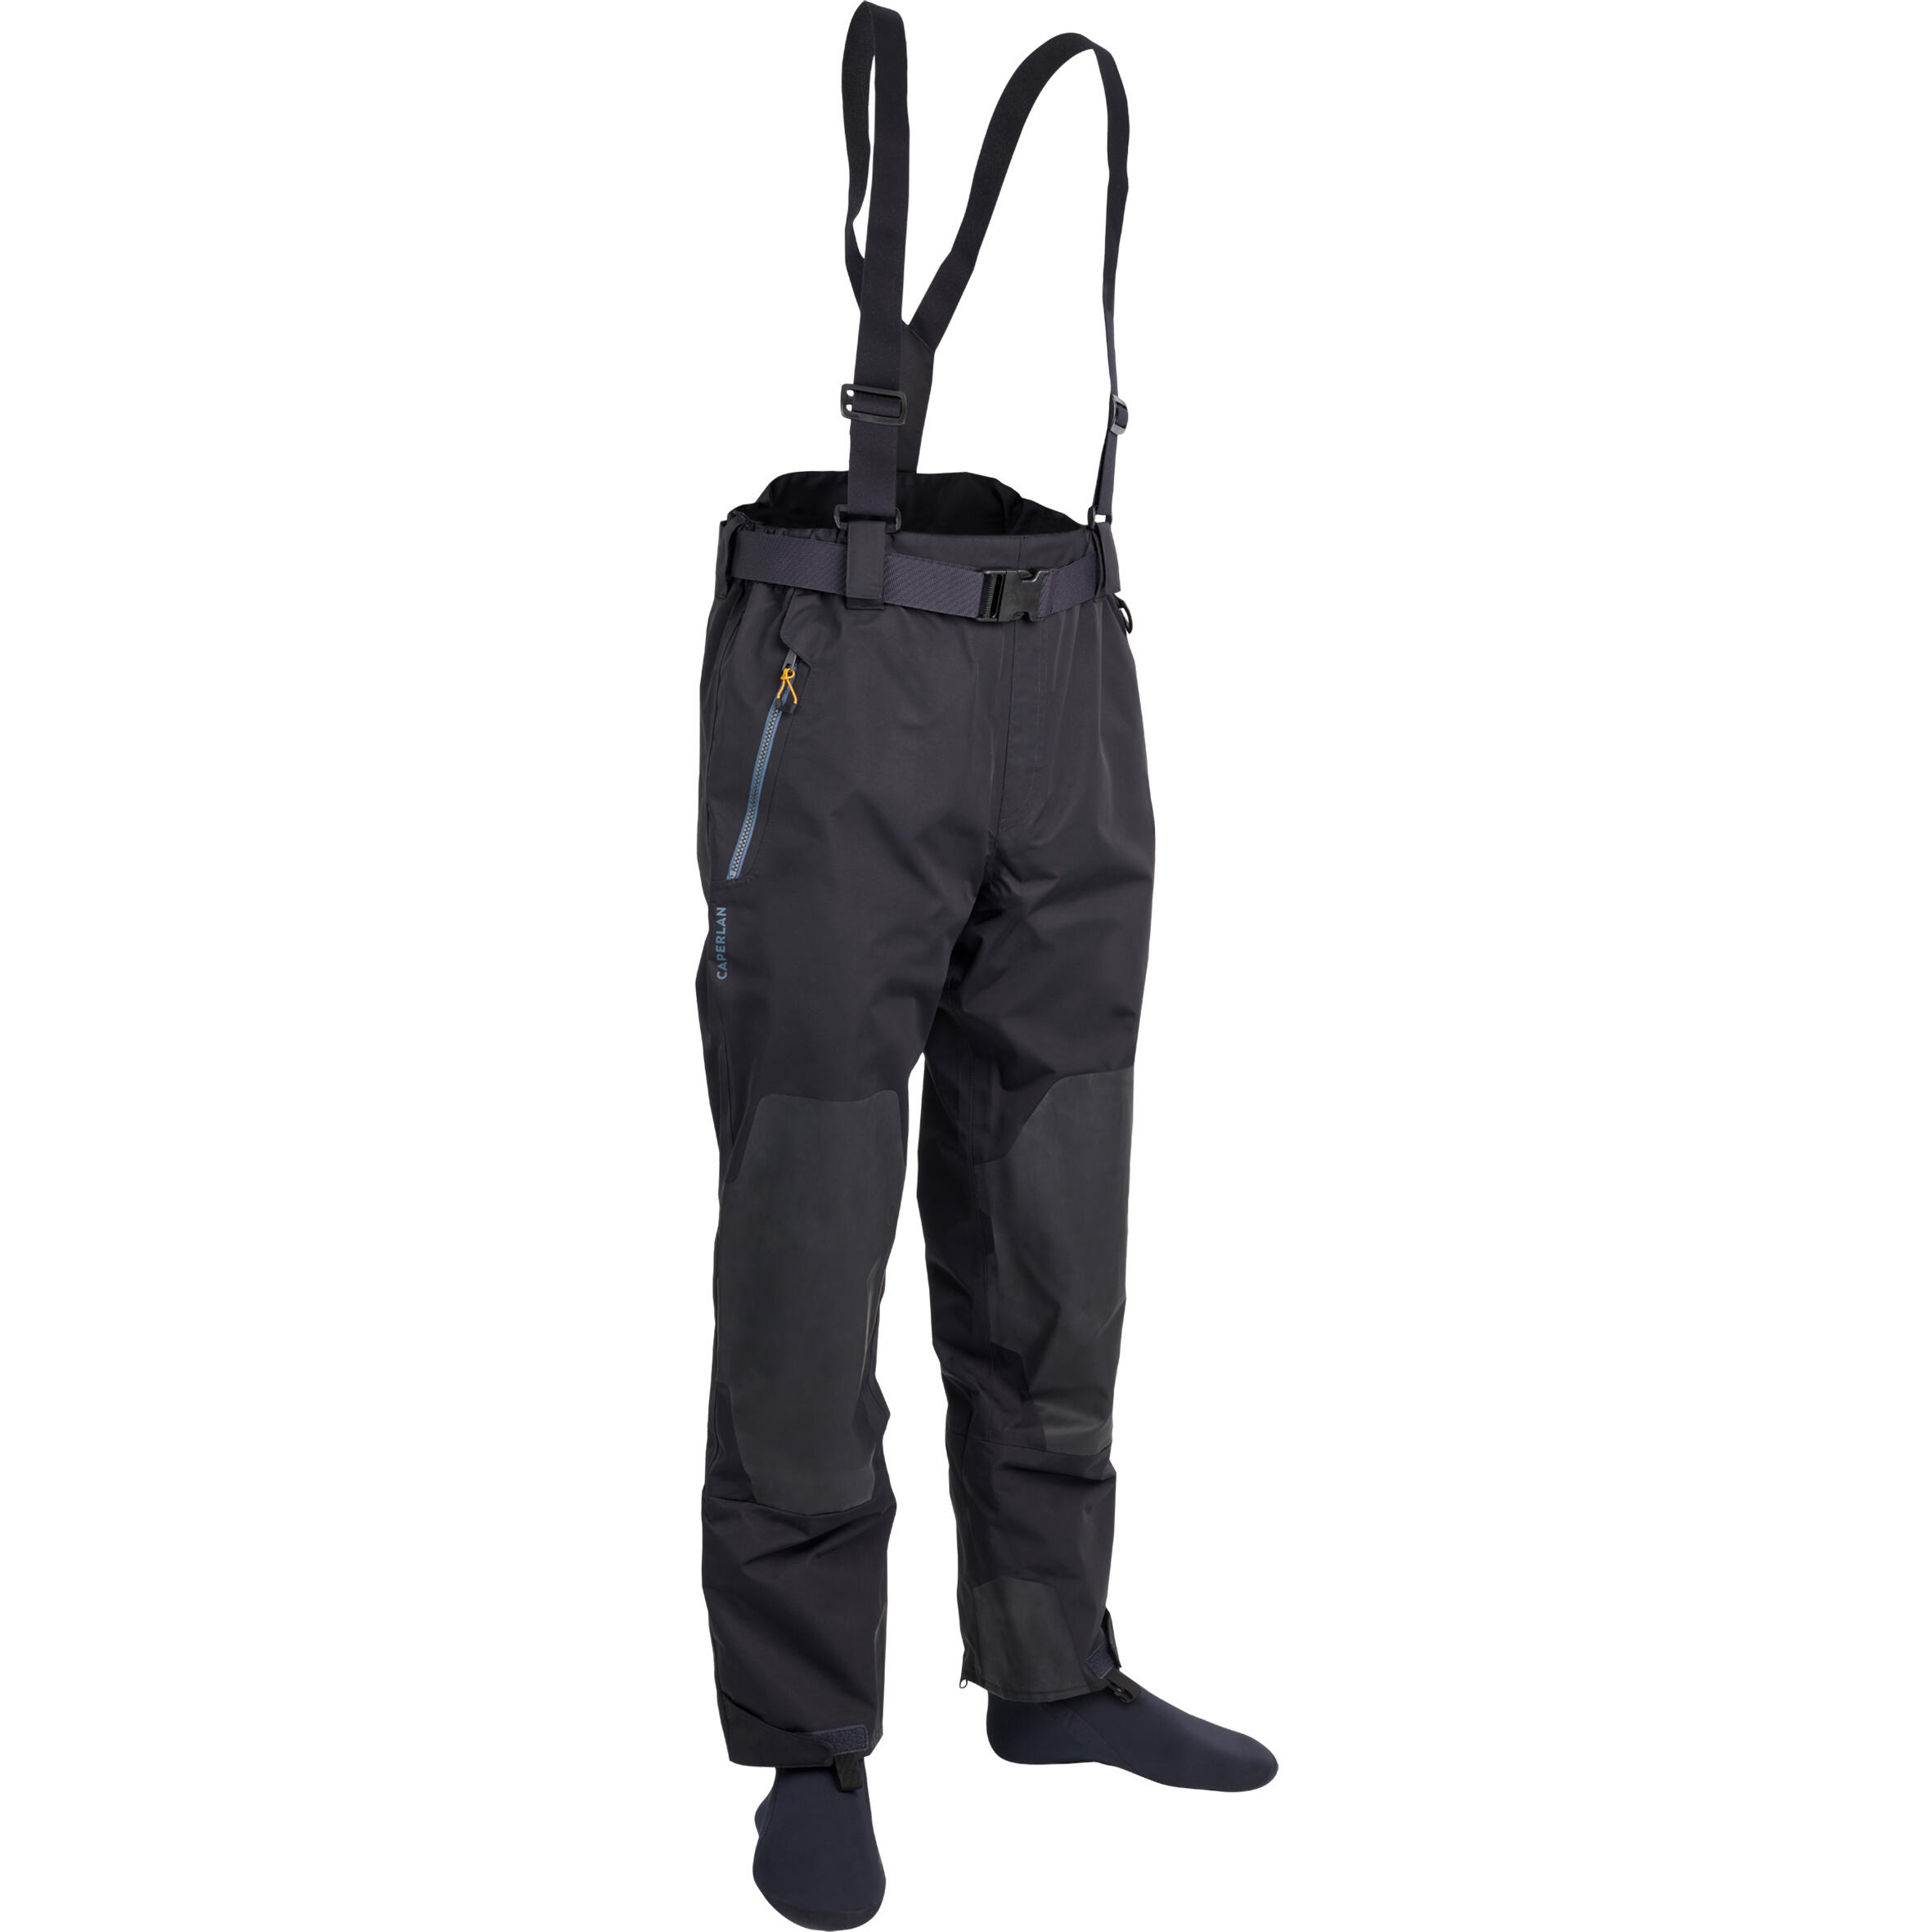 Waterproof, breathable wading trousers with neoprene booties - TW 900 BR-S 9/10